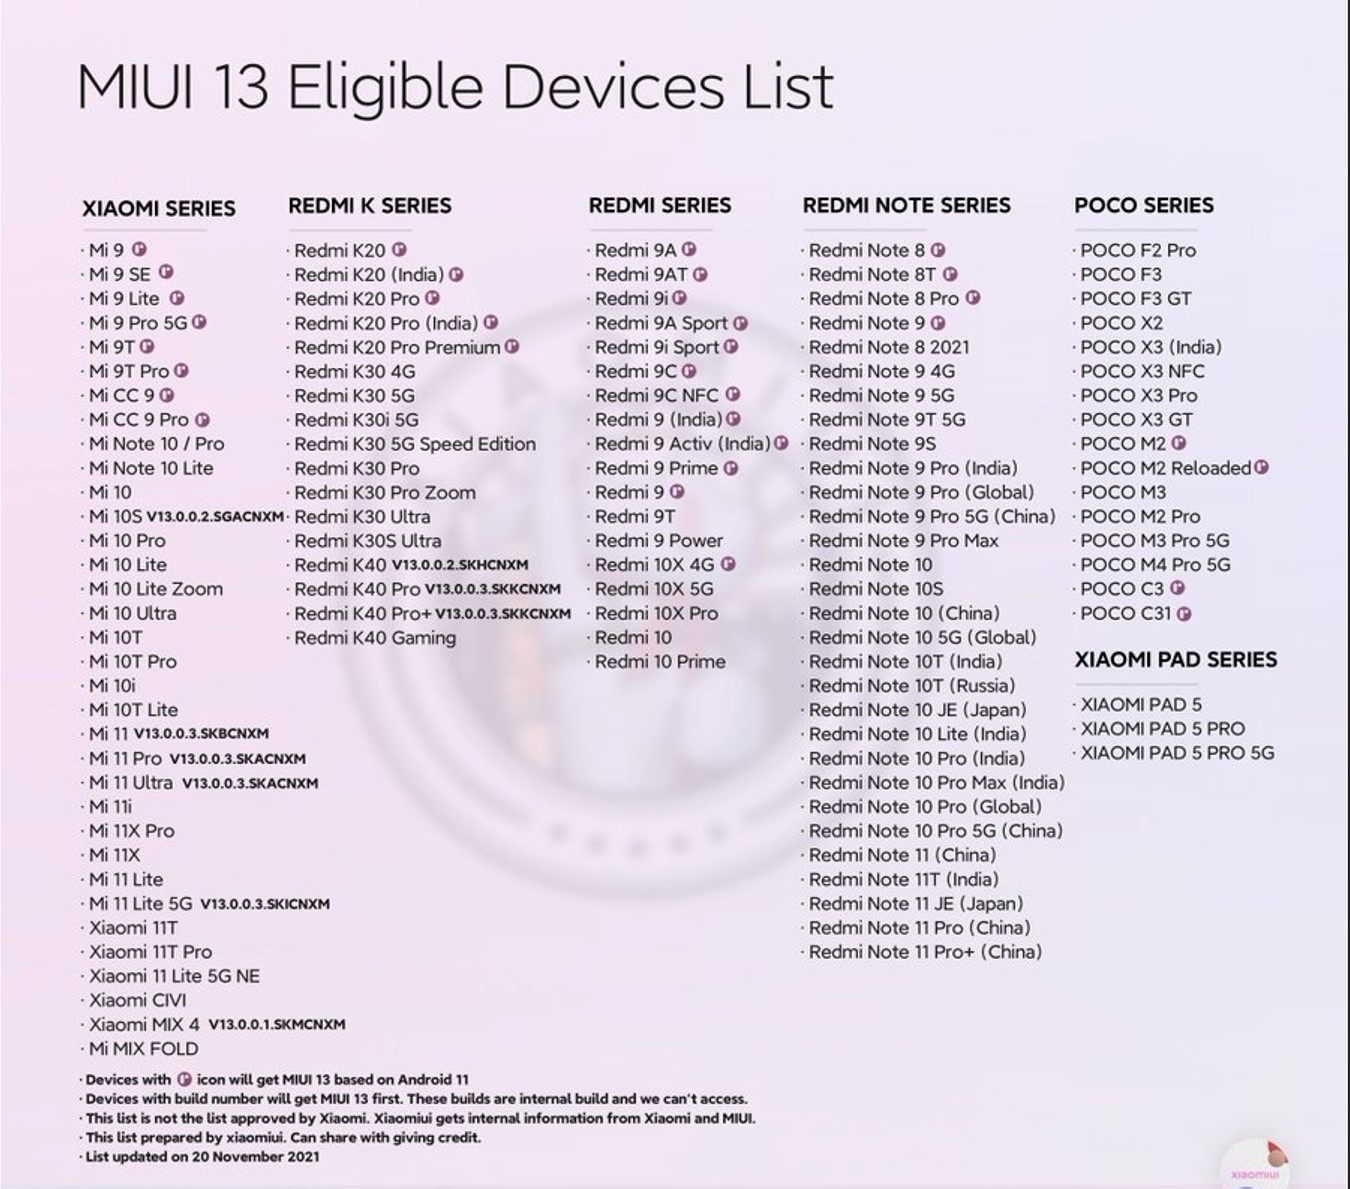 MIUI 13 is expected to debut on December 16